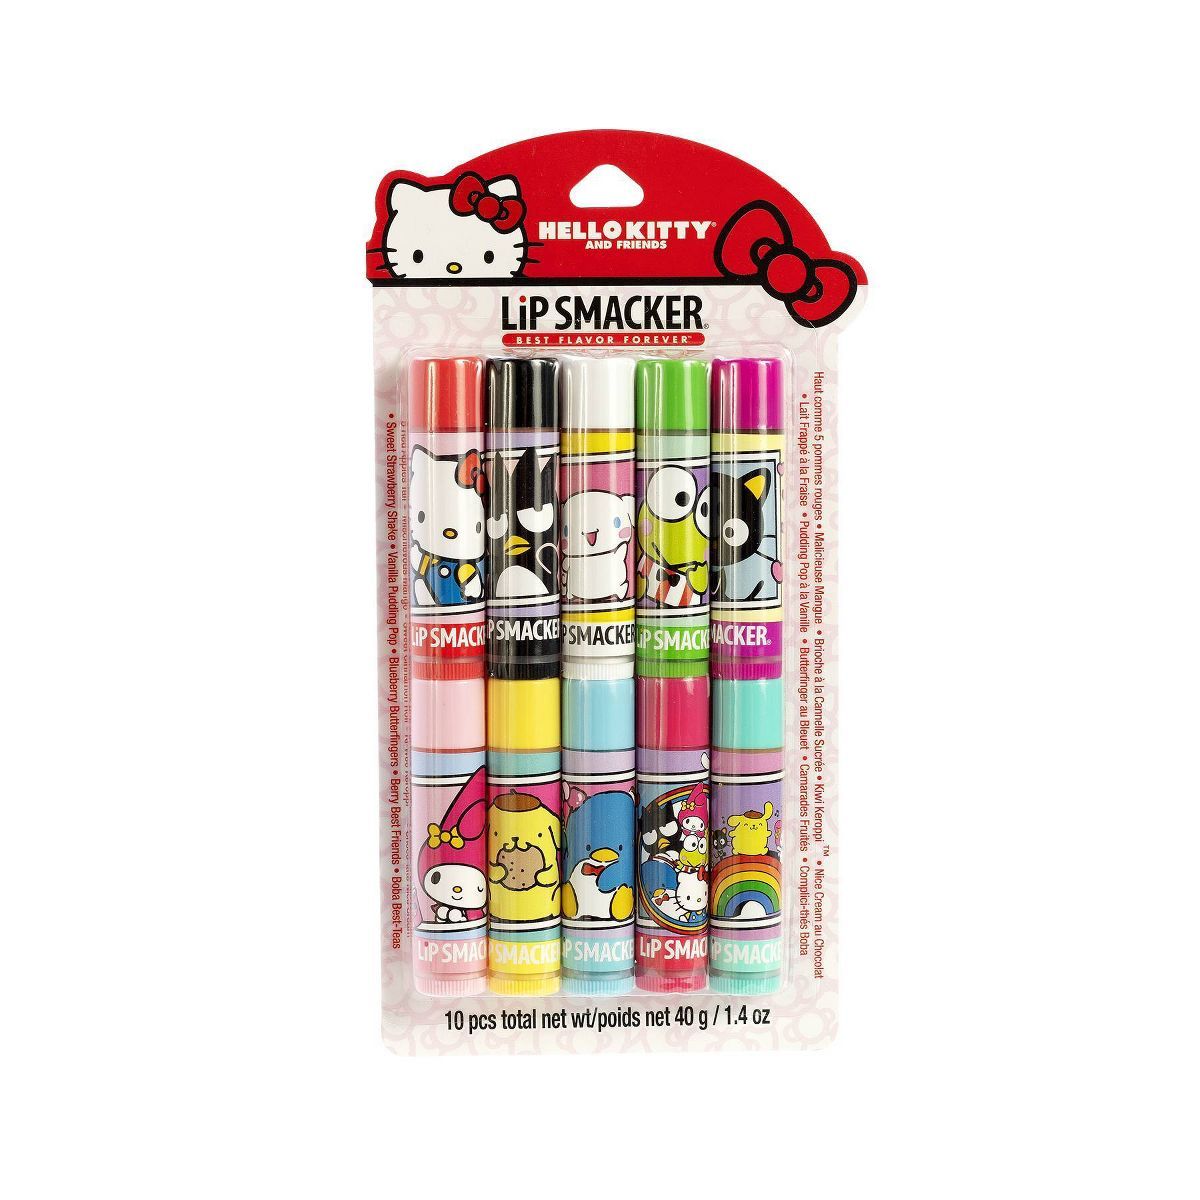 Lip Smackers Hello Kitty Party Pack - 10pc - 1.4oz | Target